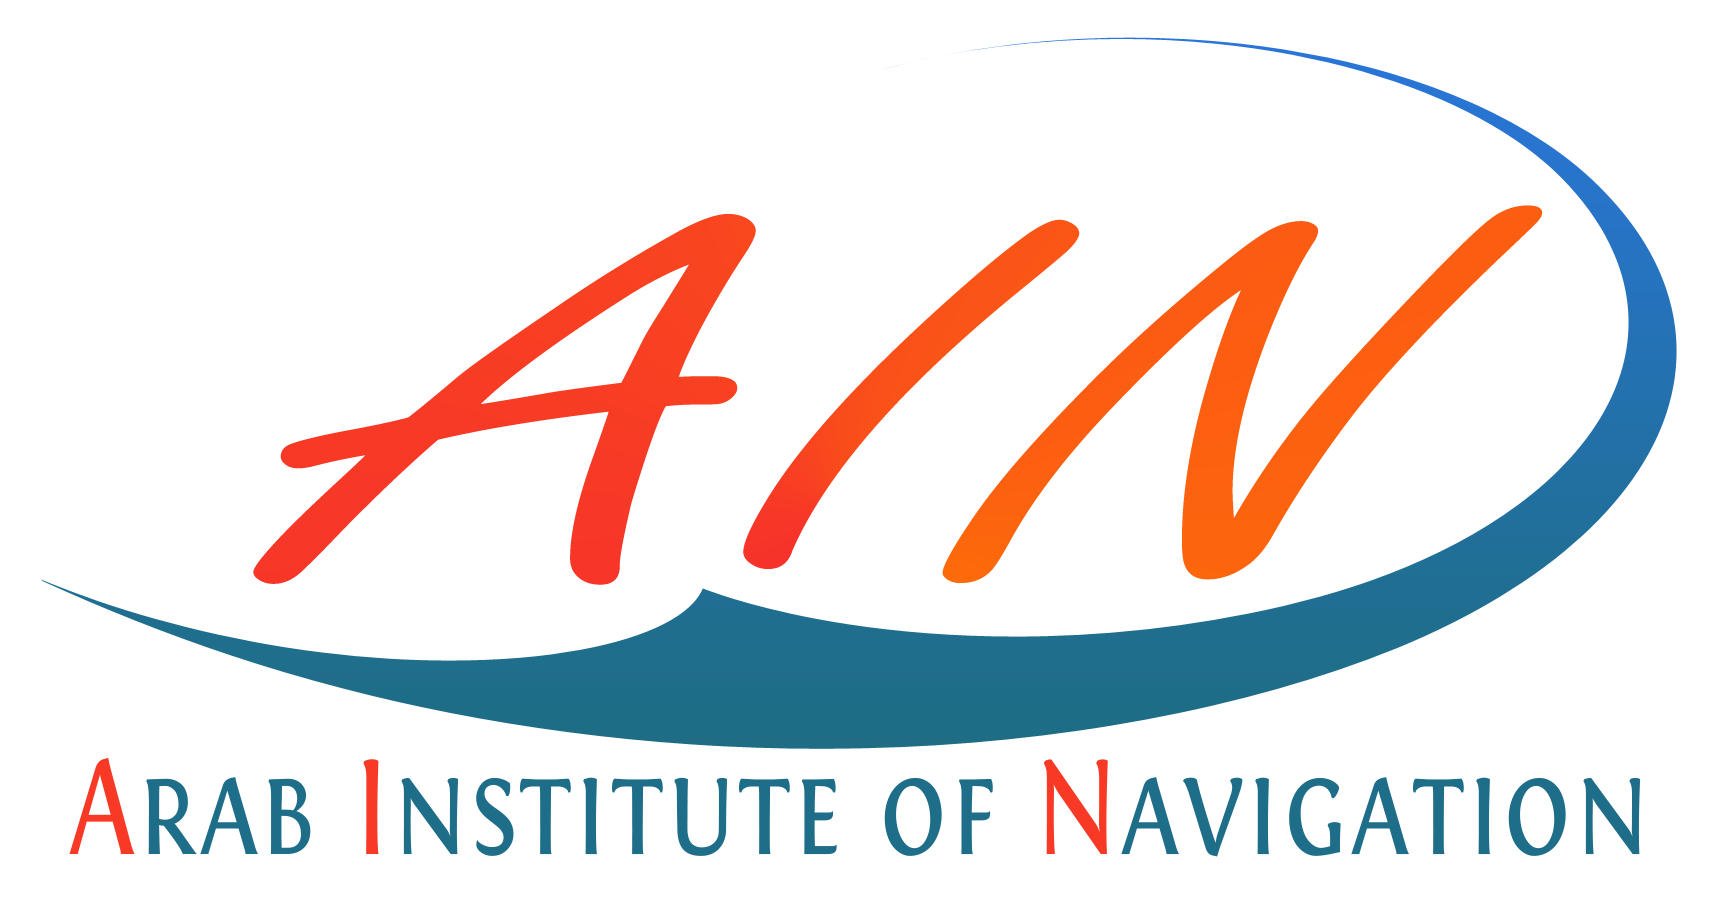 The Arab Institute of Navigation